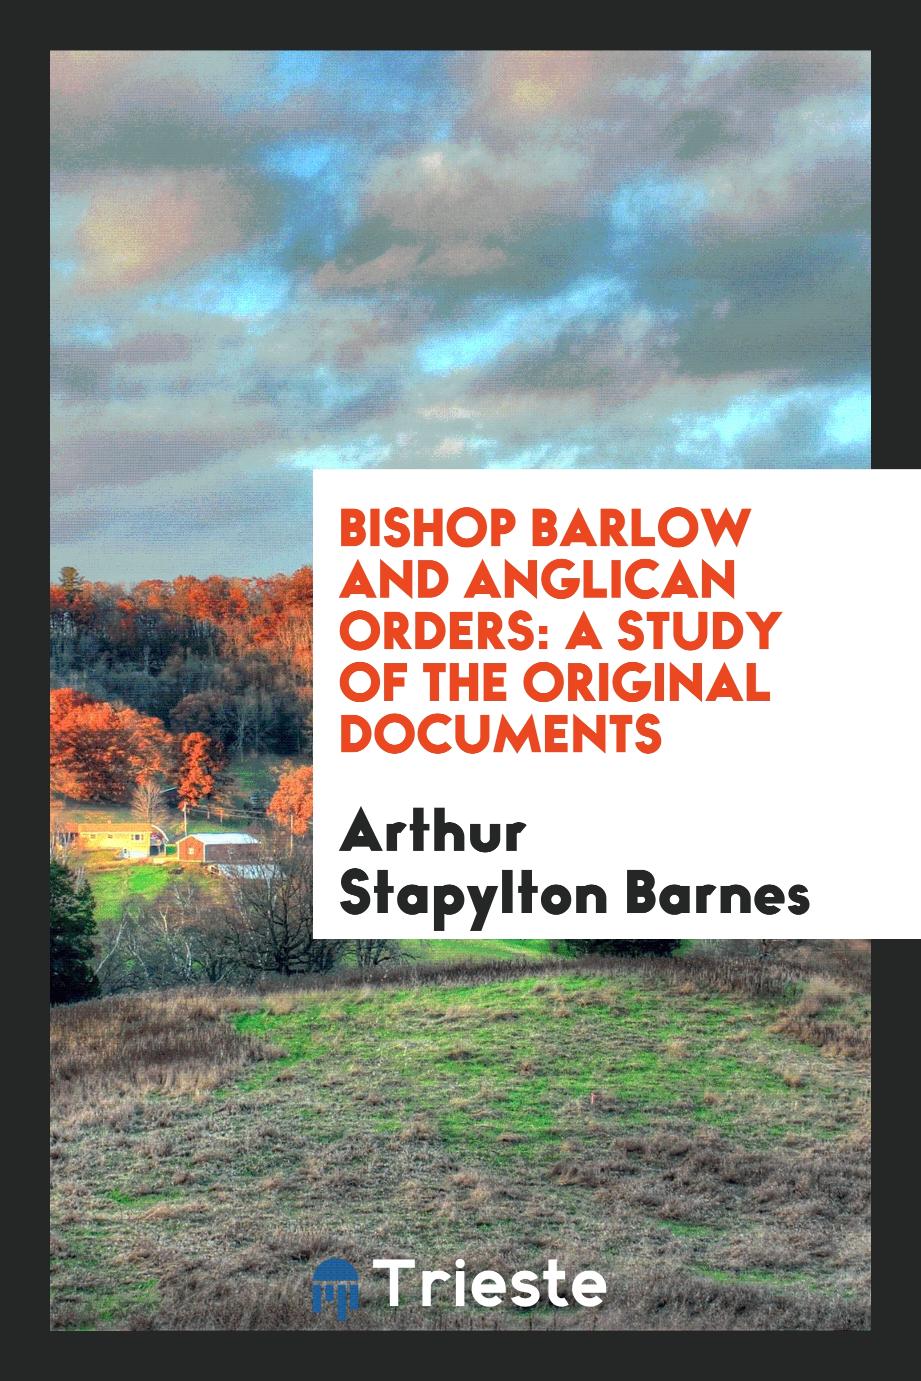 Bishop Barlow and Anglican Orders: A Study of the Original Documents